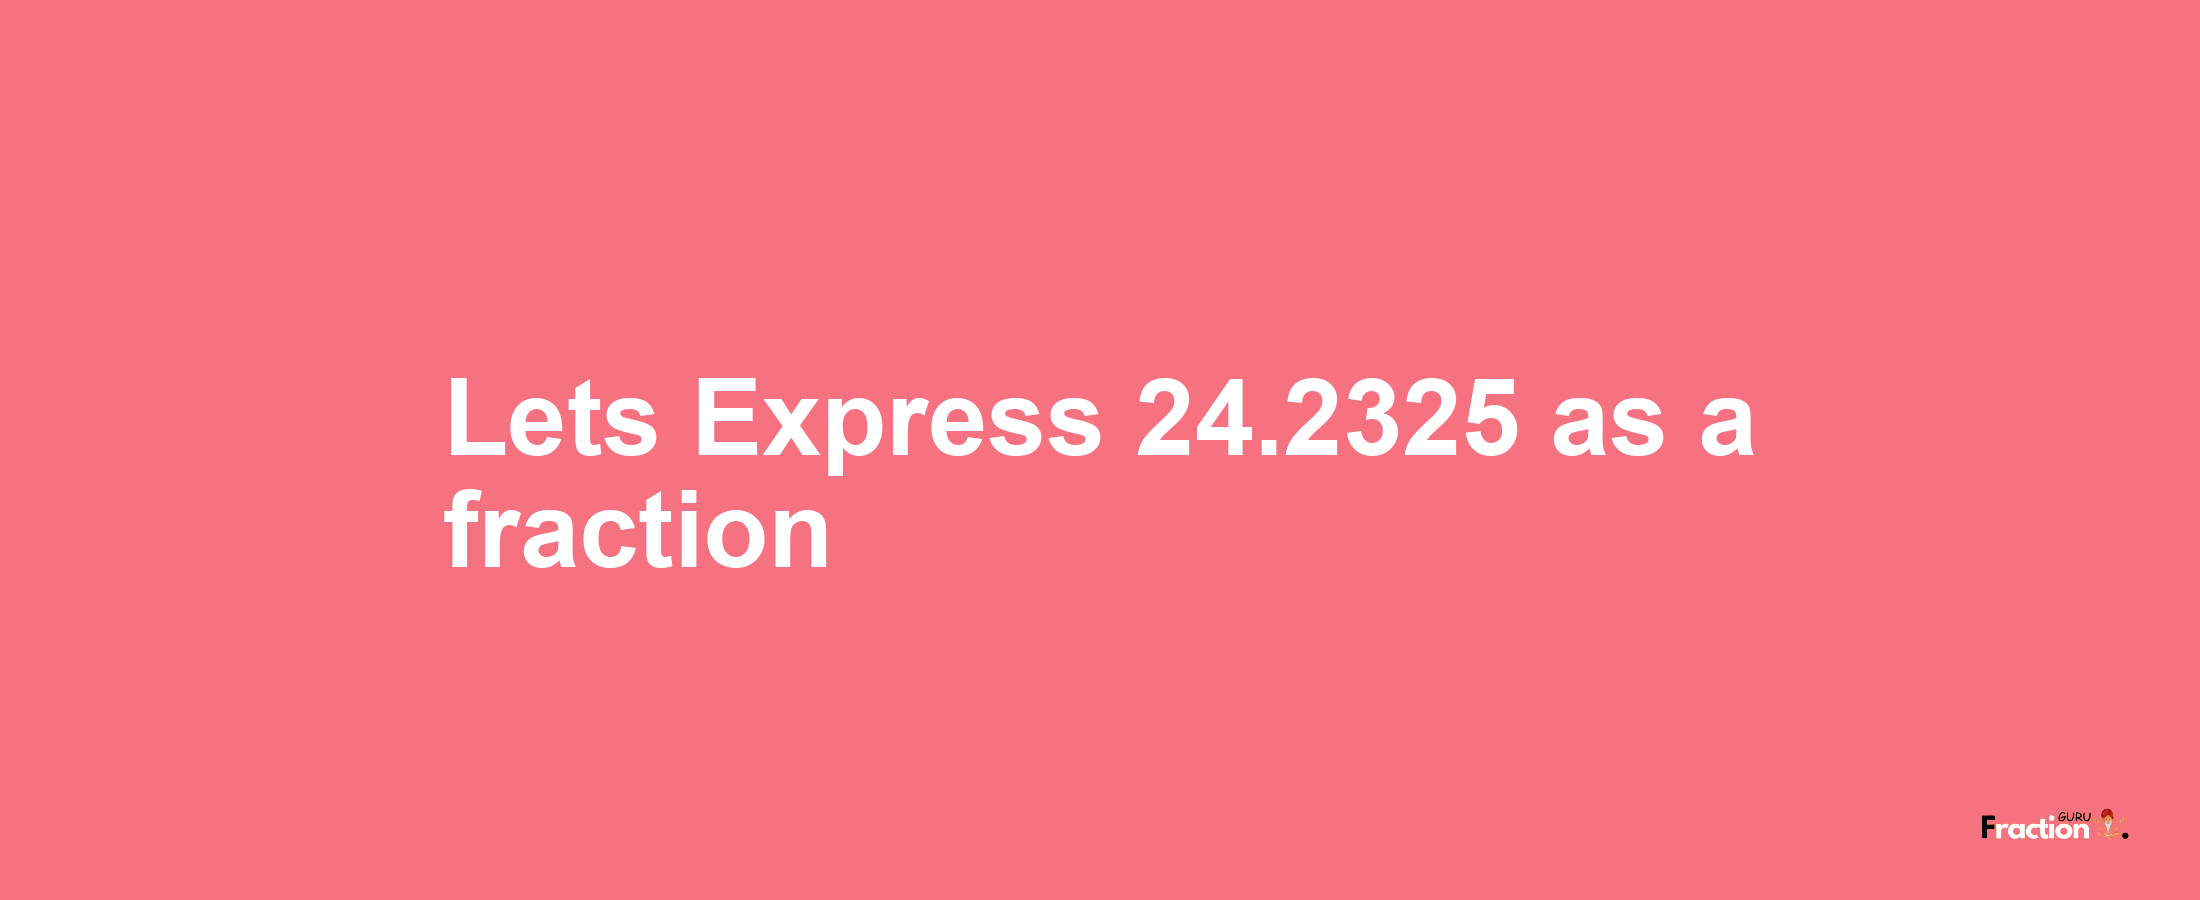 Lets Express 24.2325 as afraction